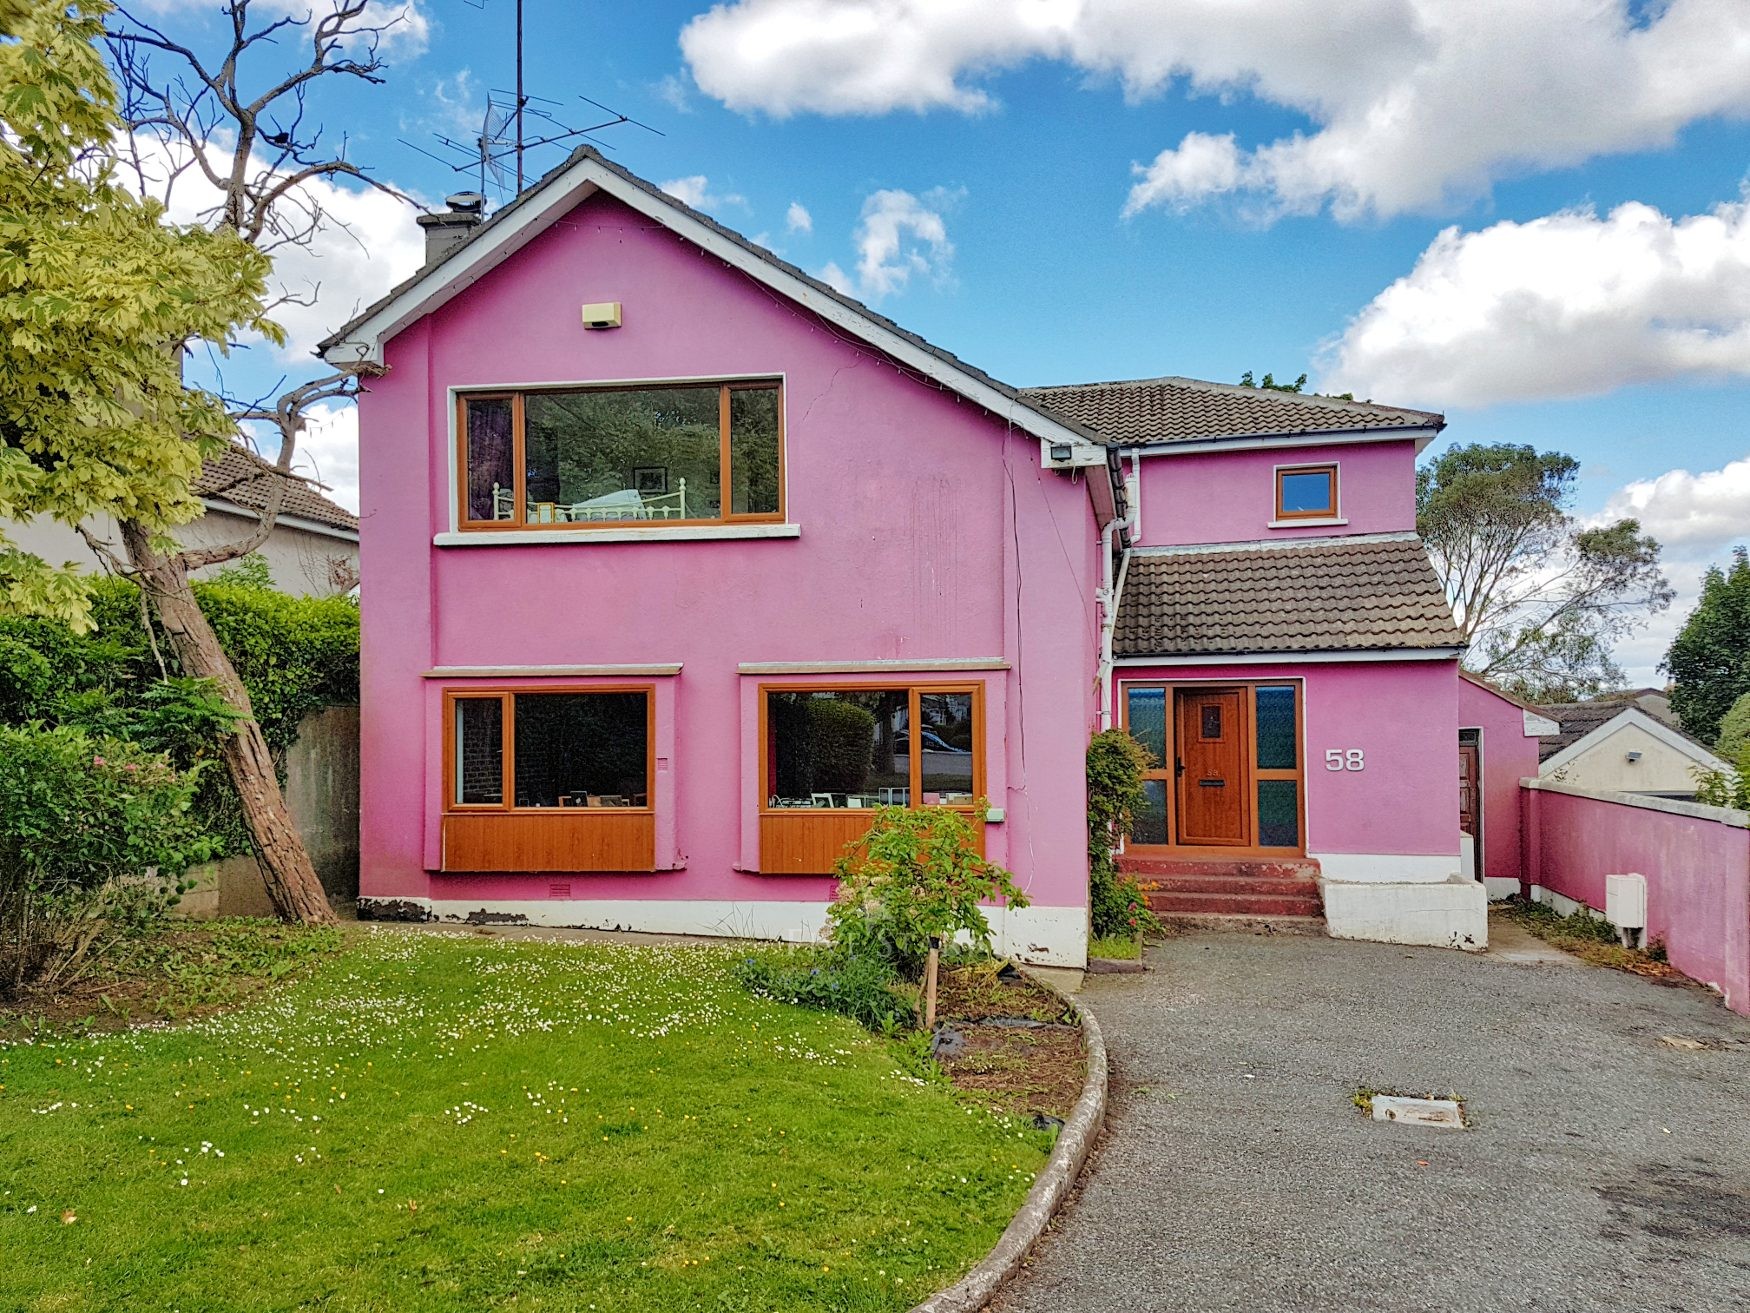 Thormanby by The Sea Howth - €850,000